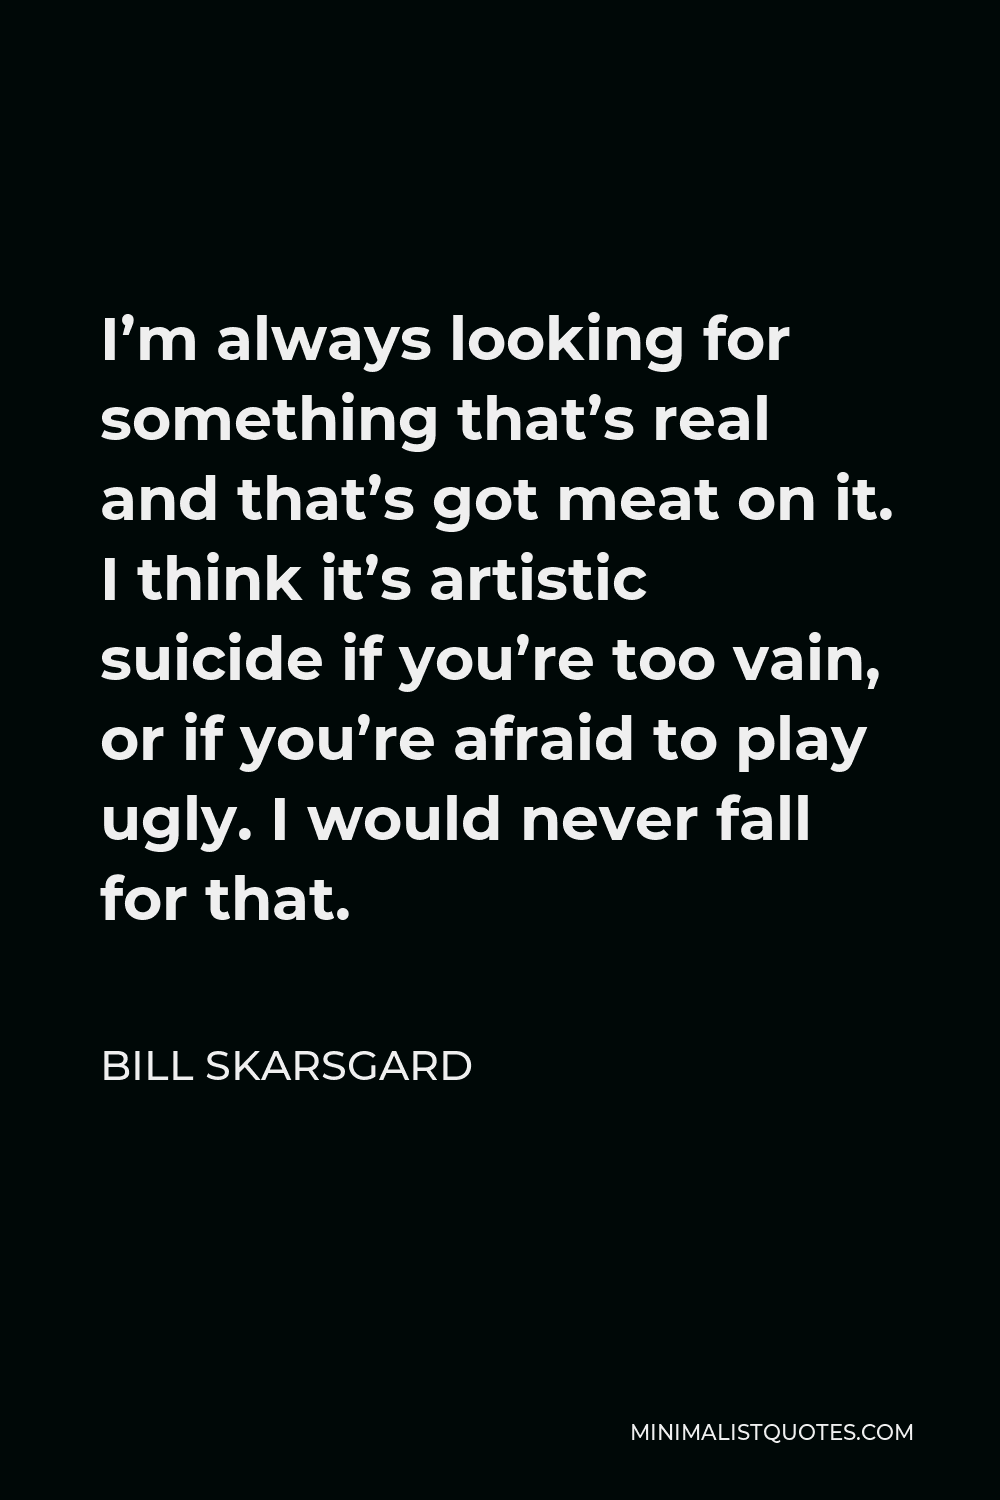 Bill Skarsgard Quote - I’m always looking for something that’s real and that’s got meat on it. I think it’s artistic suicide if you’re too vain, or if you’re afraid to play ugly. I would never fall for that.